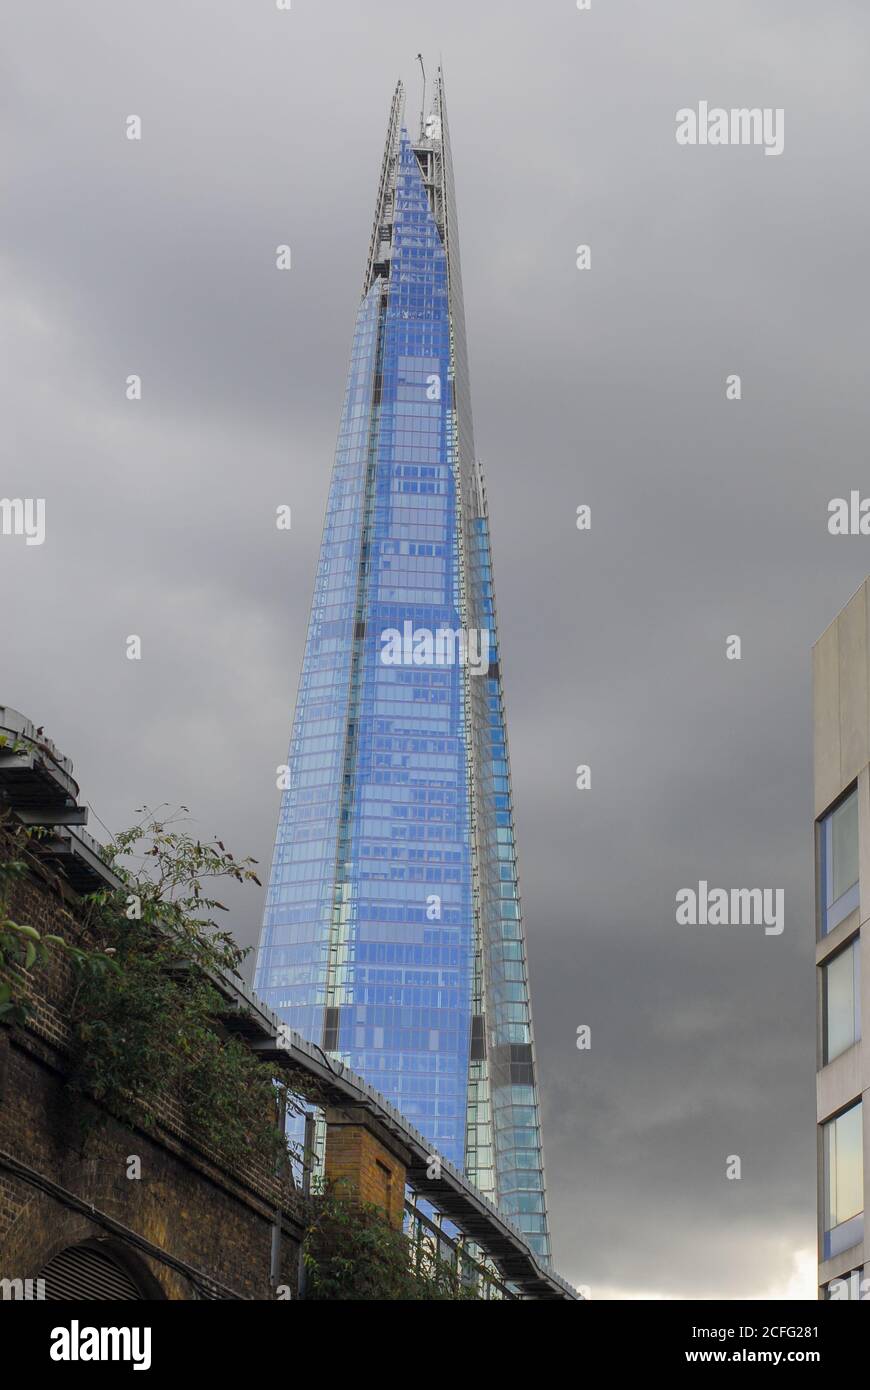 Dramatic moody view of The Shard. London. Threatening dark clouds highlight the blue tinted glass of the iconic building on the London skyline. Stock Photo